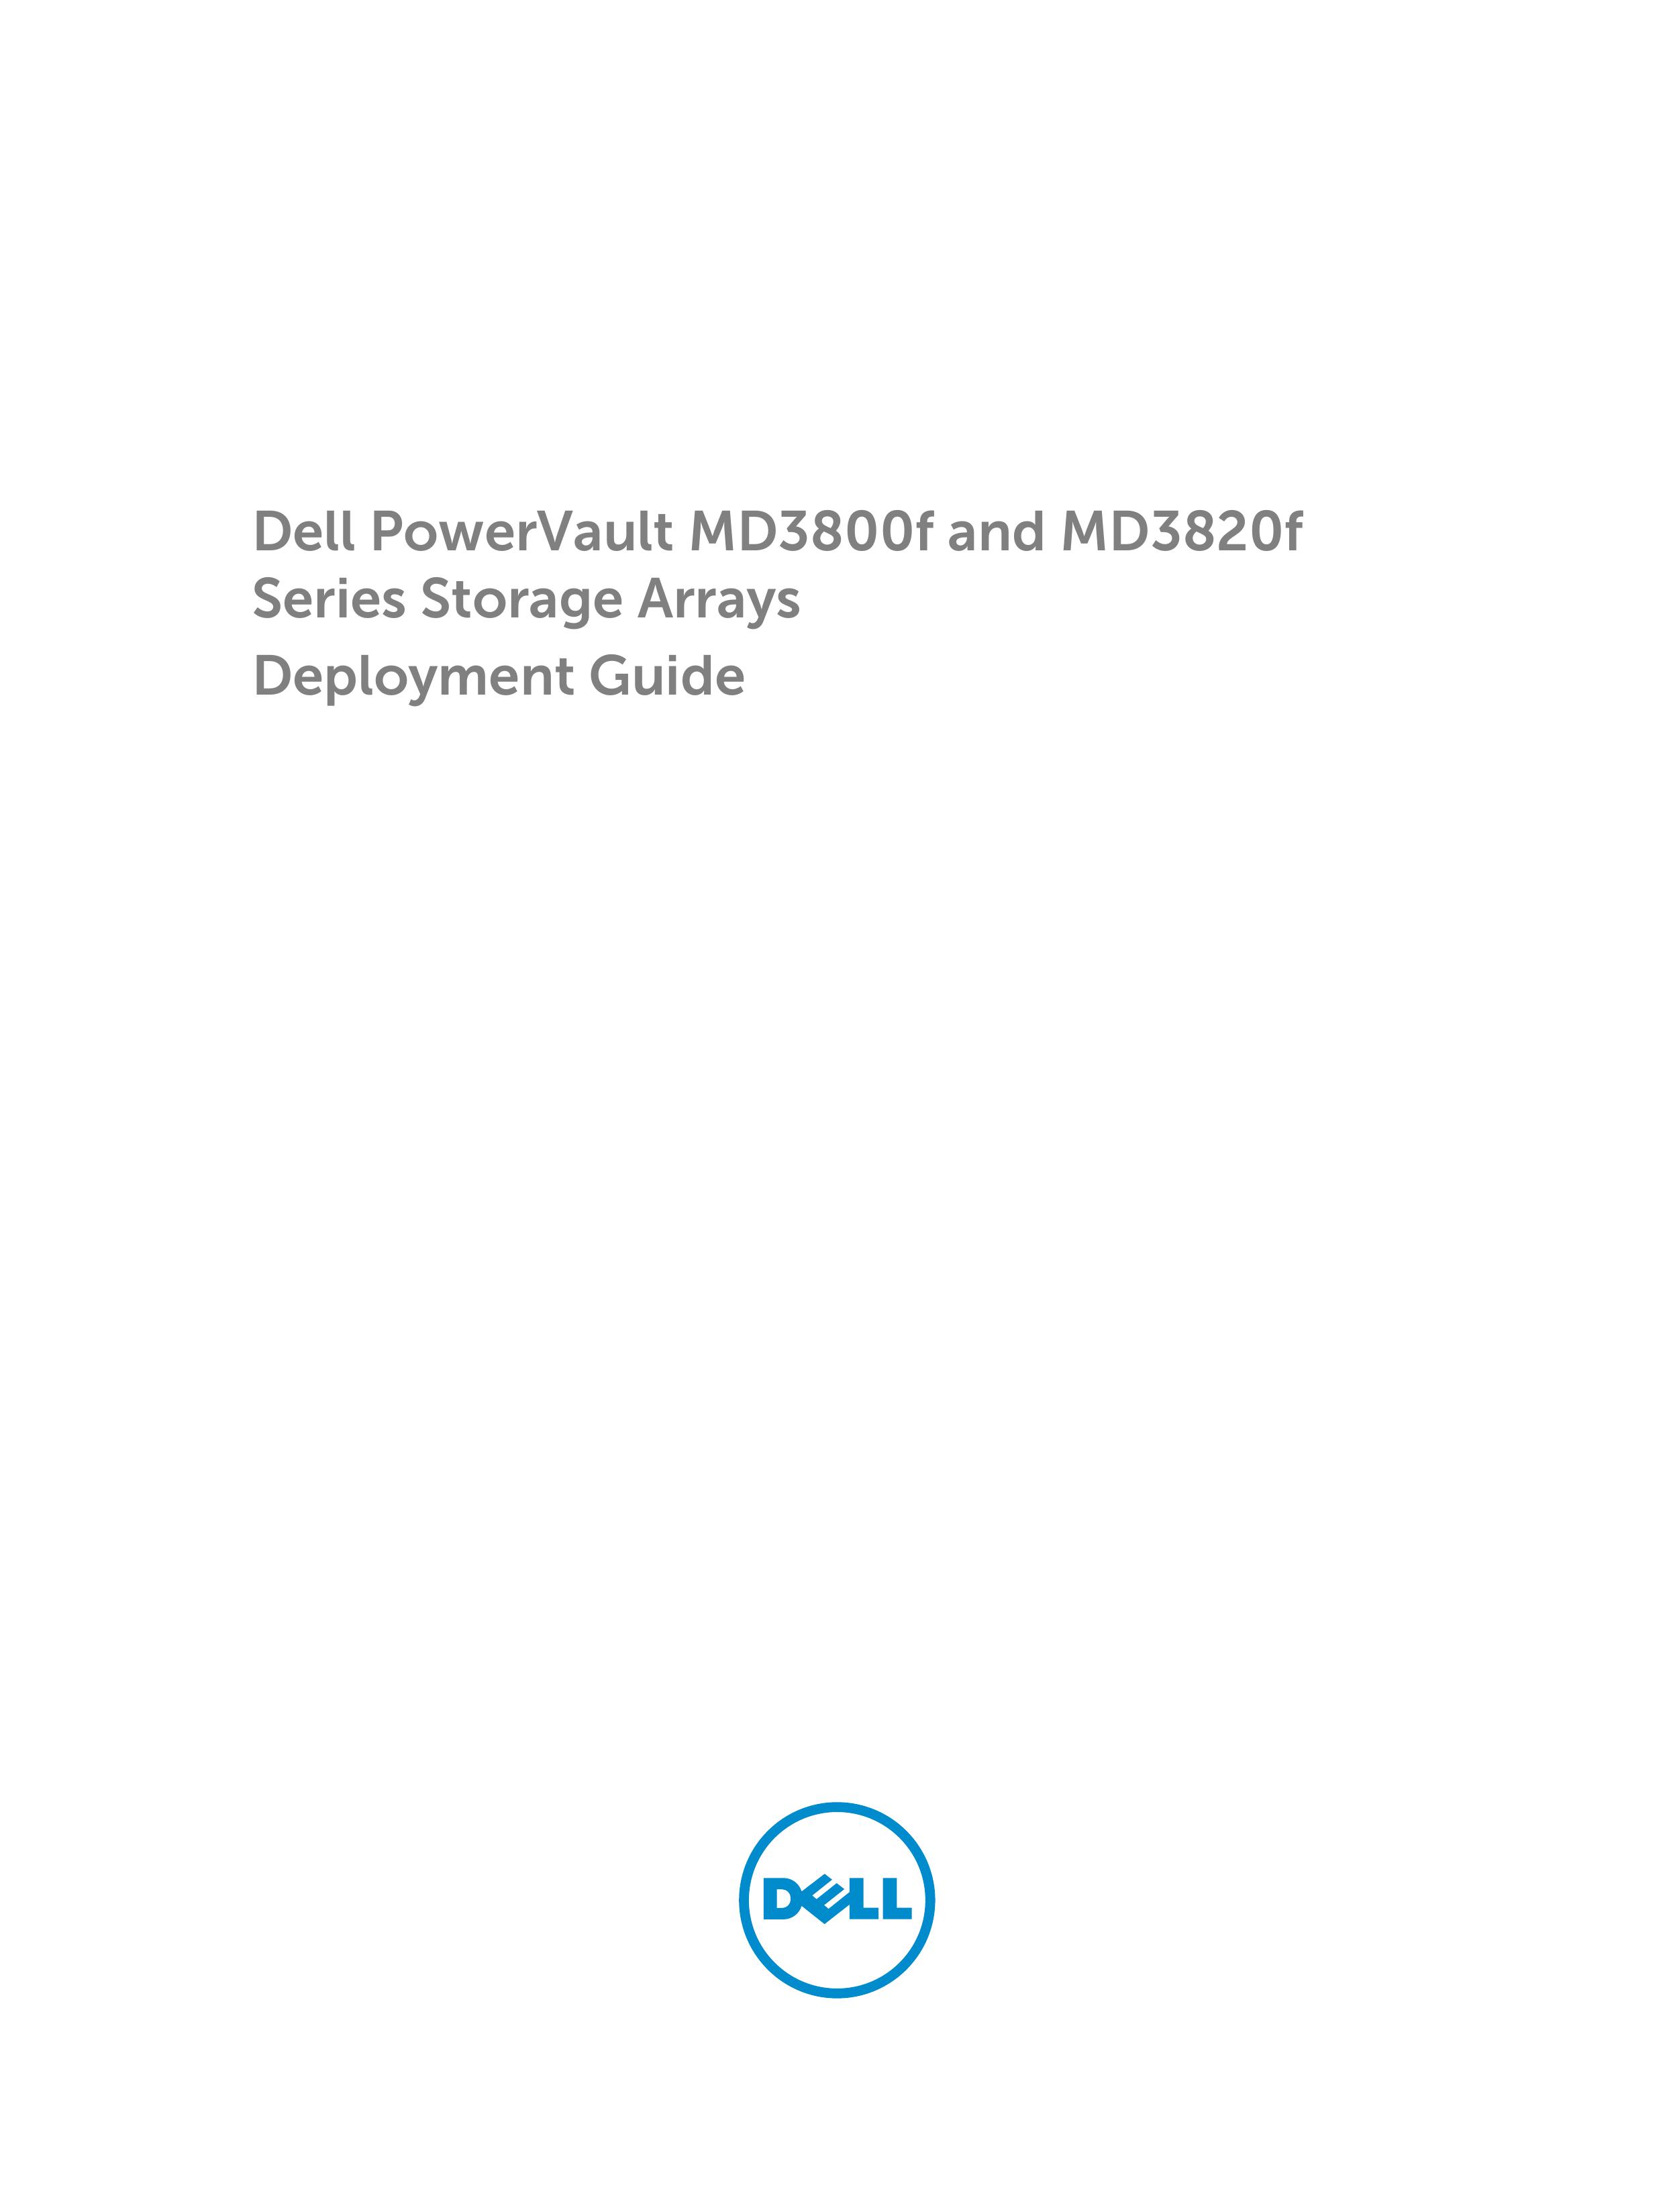 Dell MD3820f Outdoor Storage User Manual